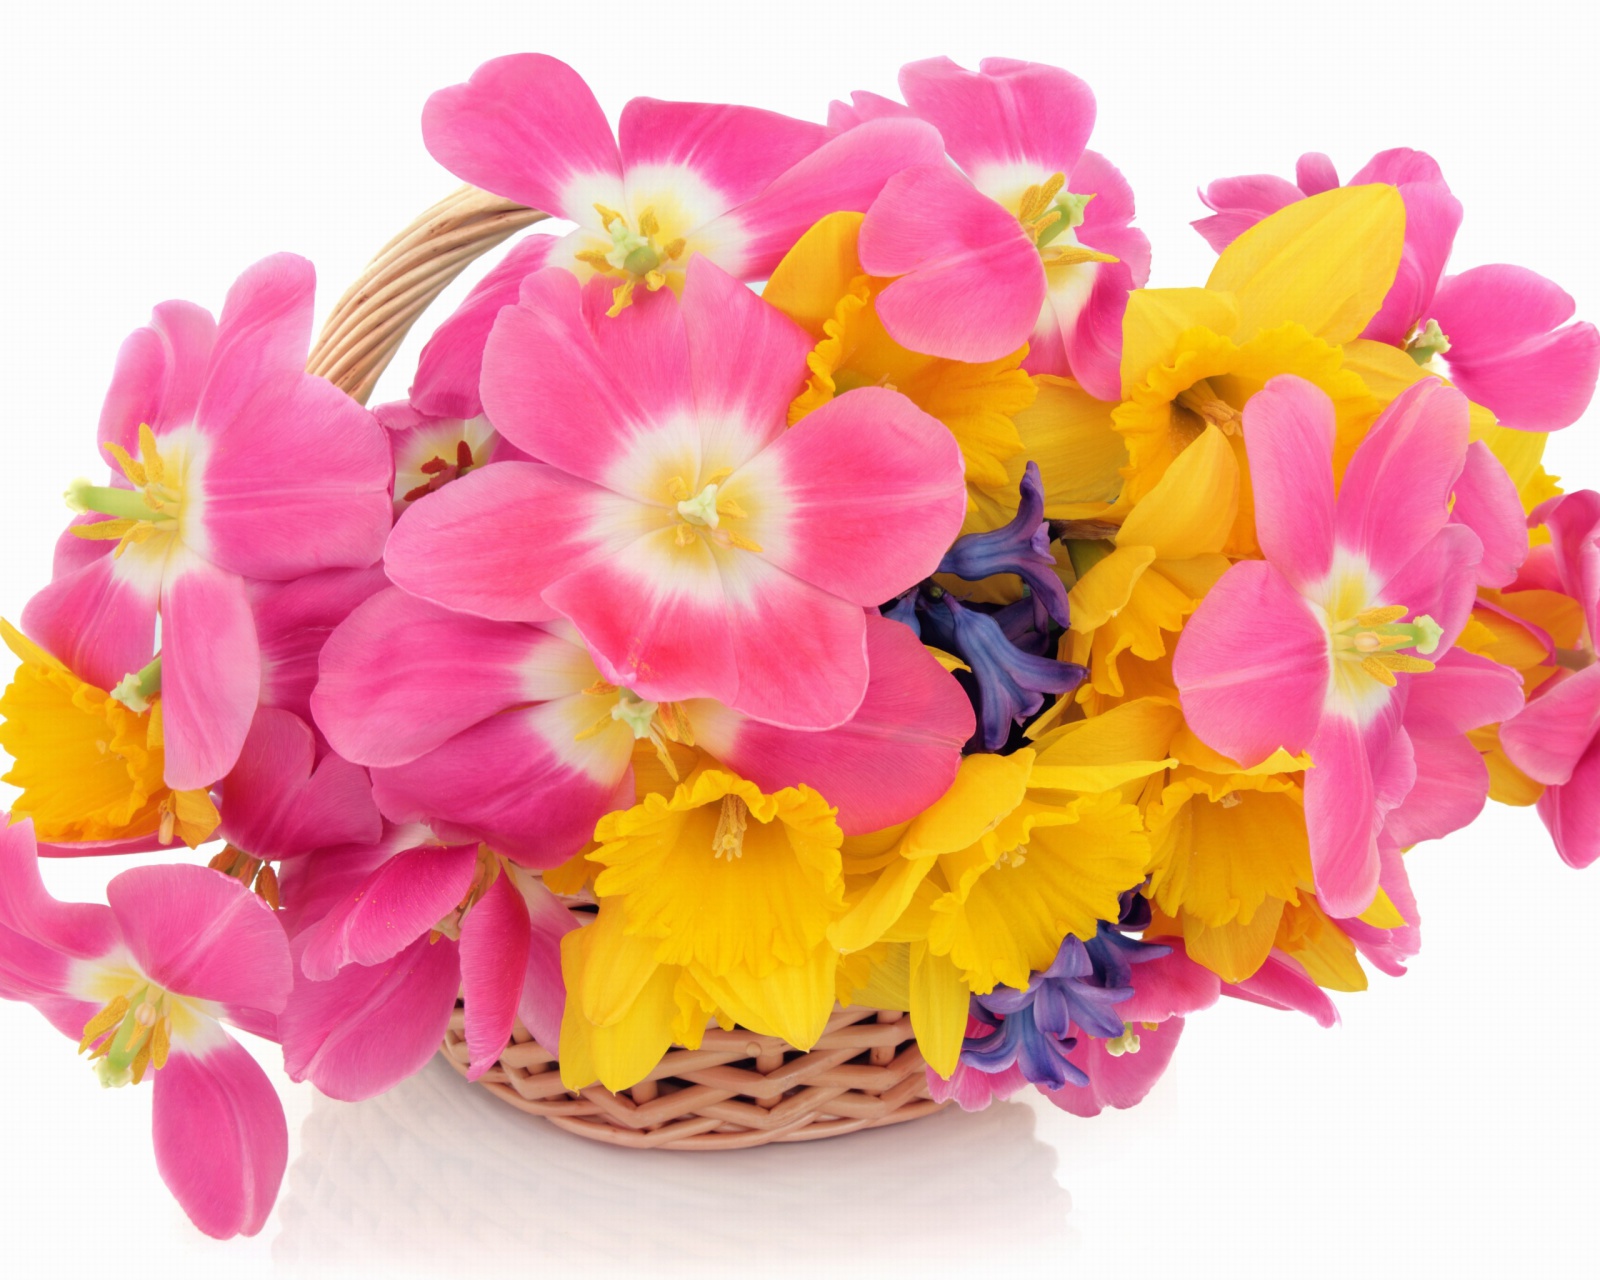 Das Indoor Basket of Tulips and Daffodils Wallpaper 1600x1280